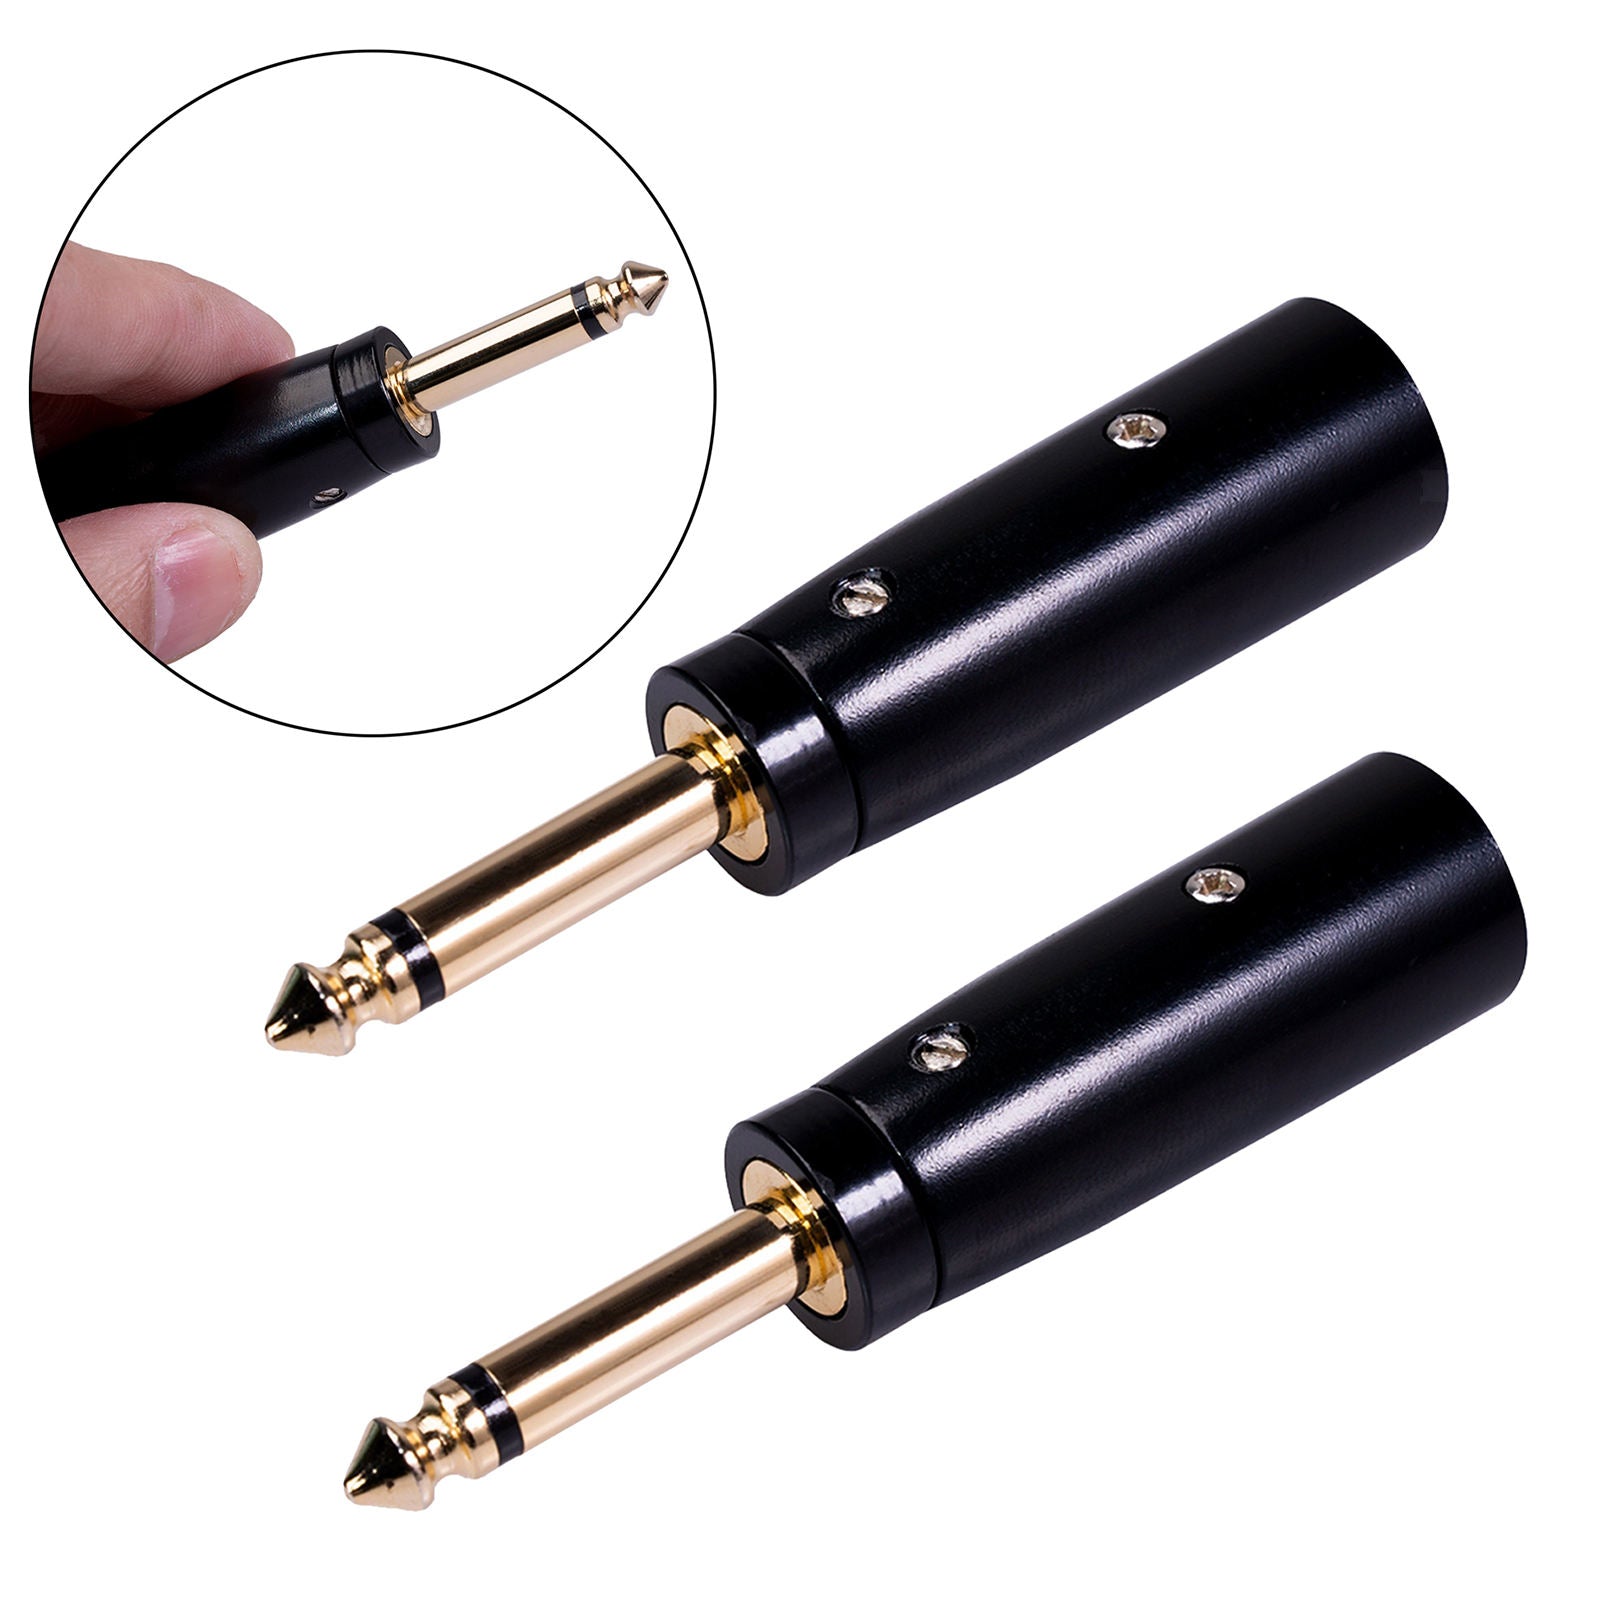 2x 3-Pin XLR Male TRS Socket Audio Mic Adapter Gender Changer Connector